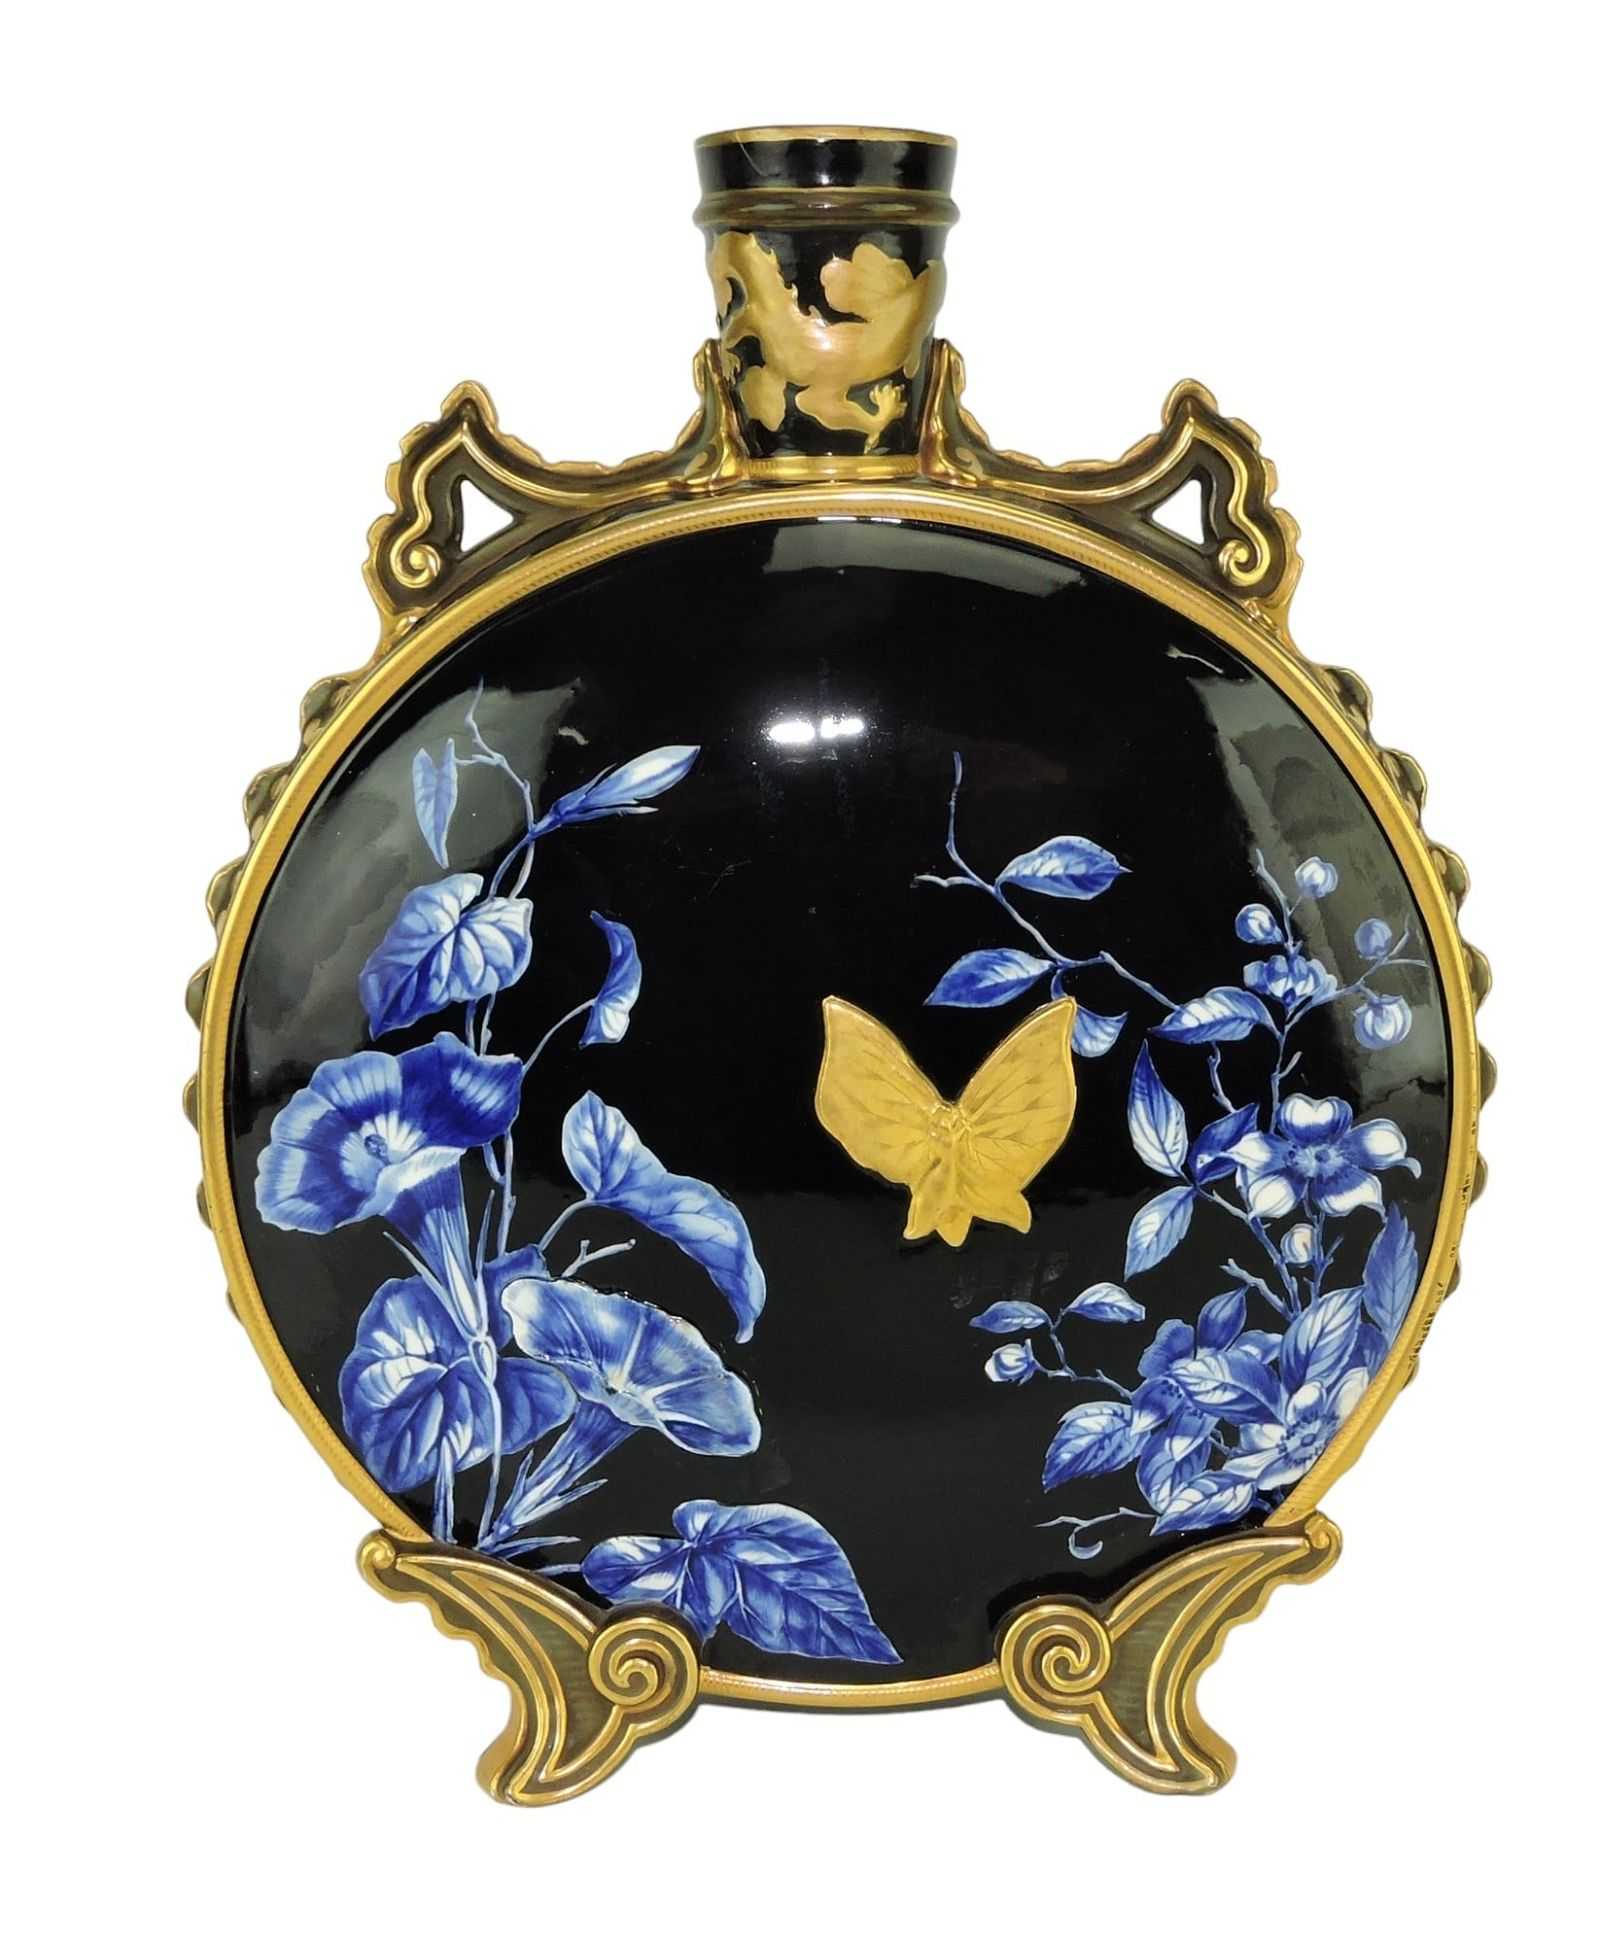 Aesthetic movement porcelain by Minton and Royal Worcester brings beauty to Strawser April 23